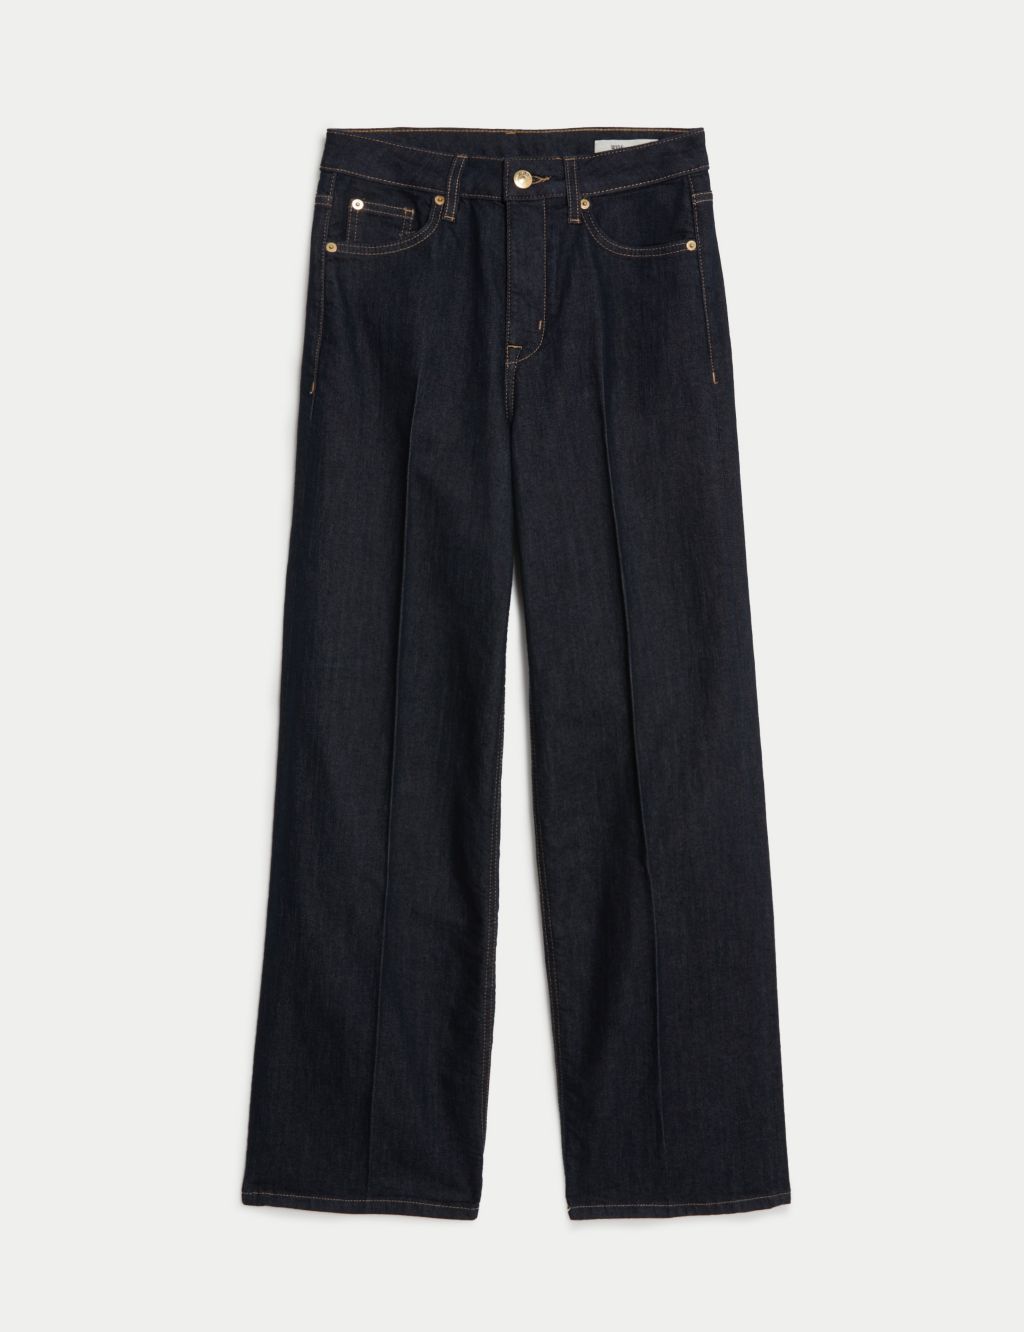 High Waisted Smart Wide Leg Jeans image 2